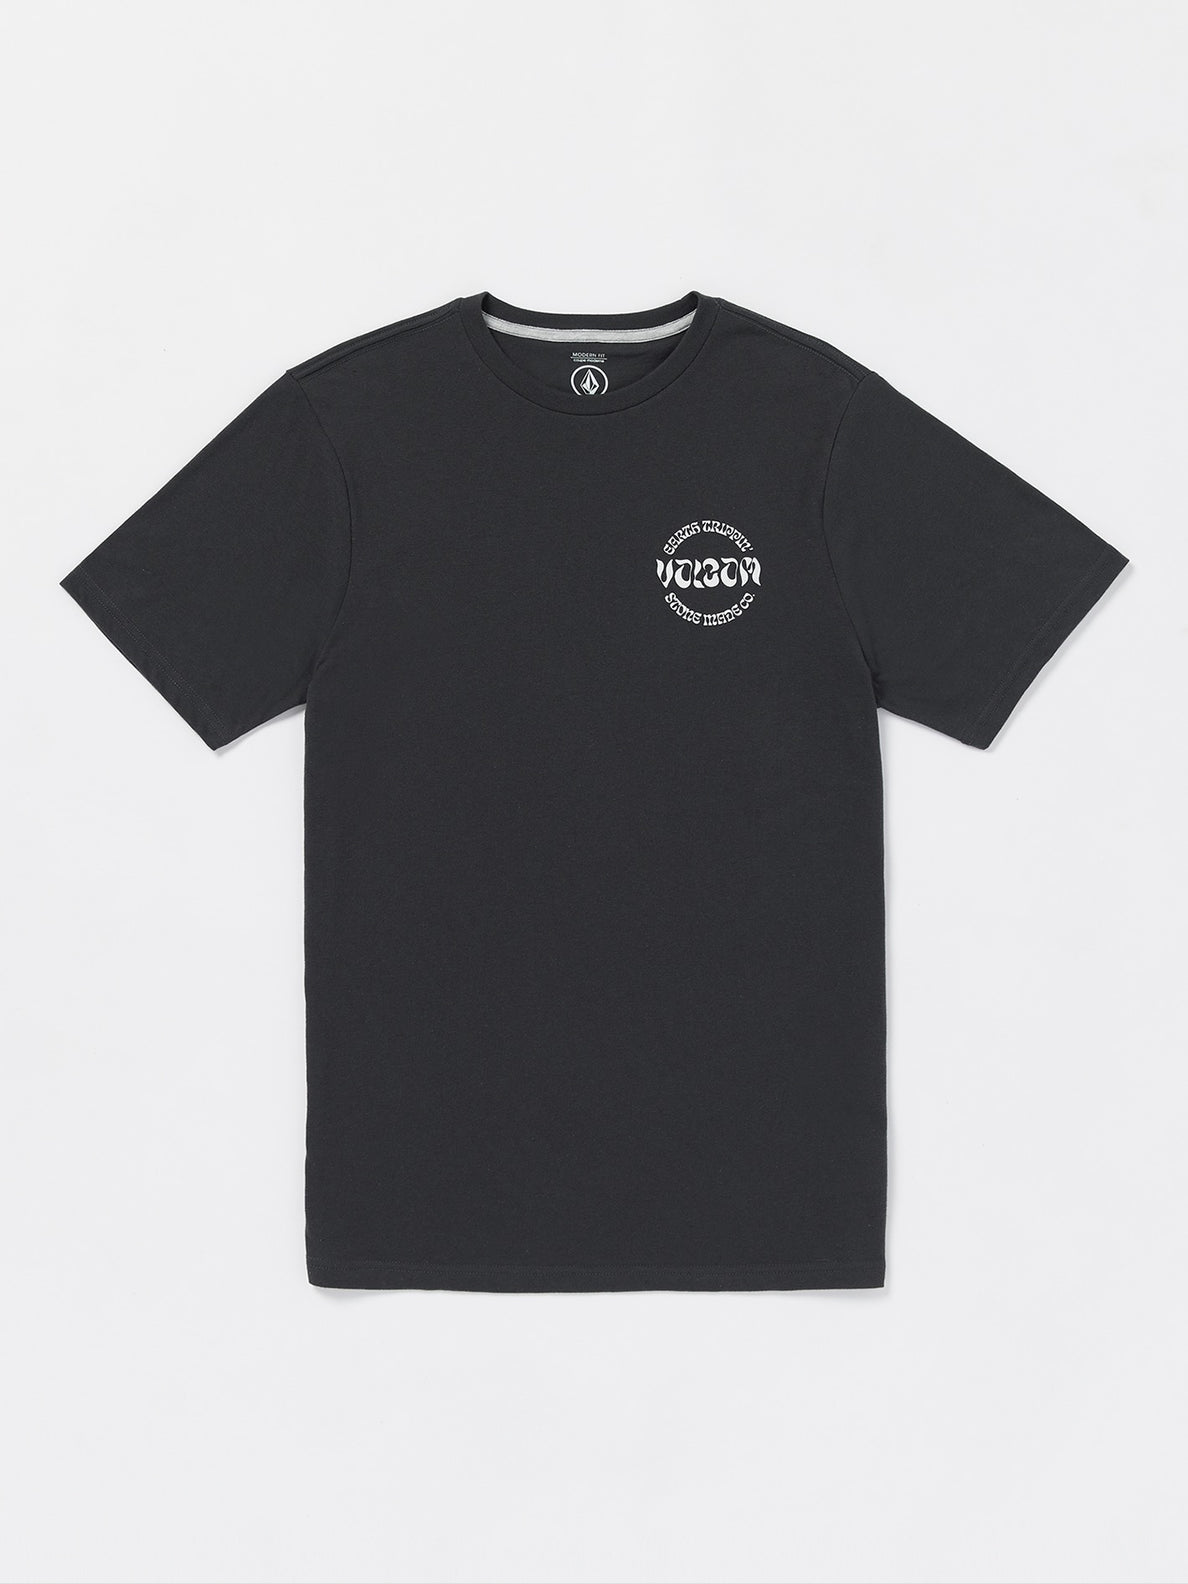 Stoneature Short Sleeve Tee - Washed Black Heather